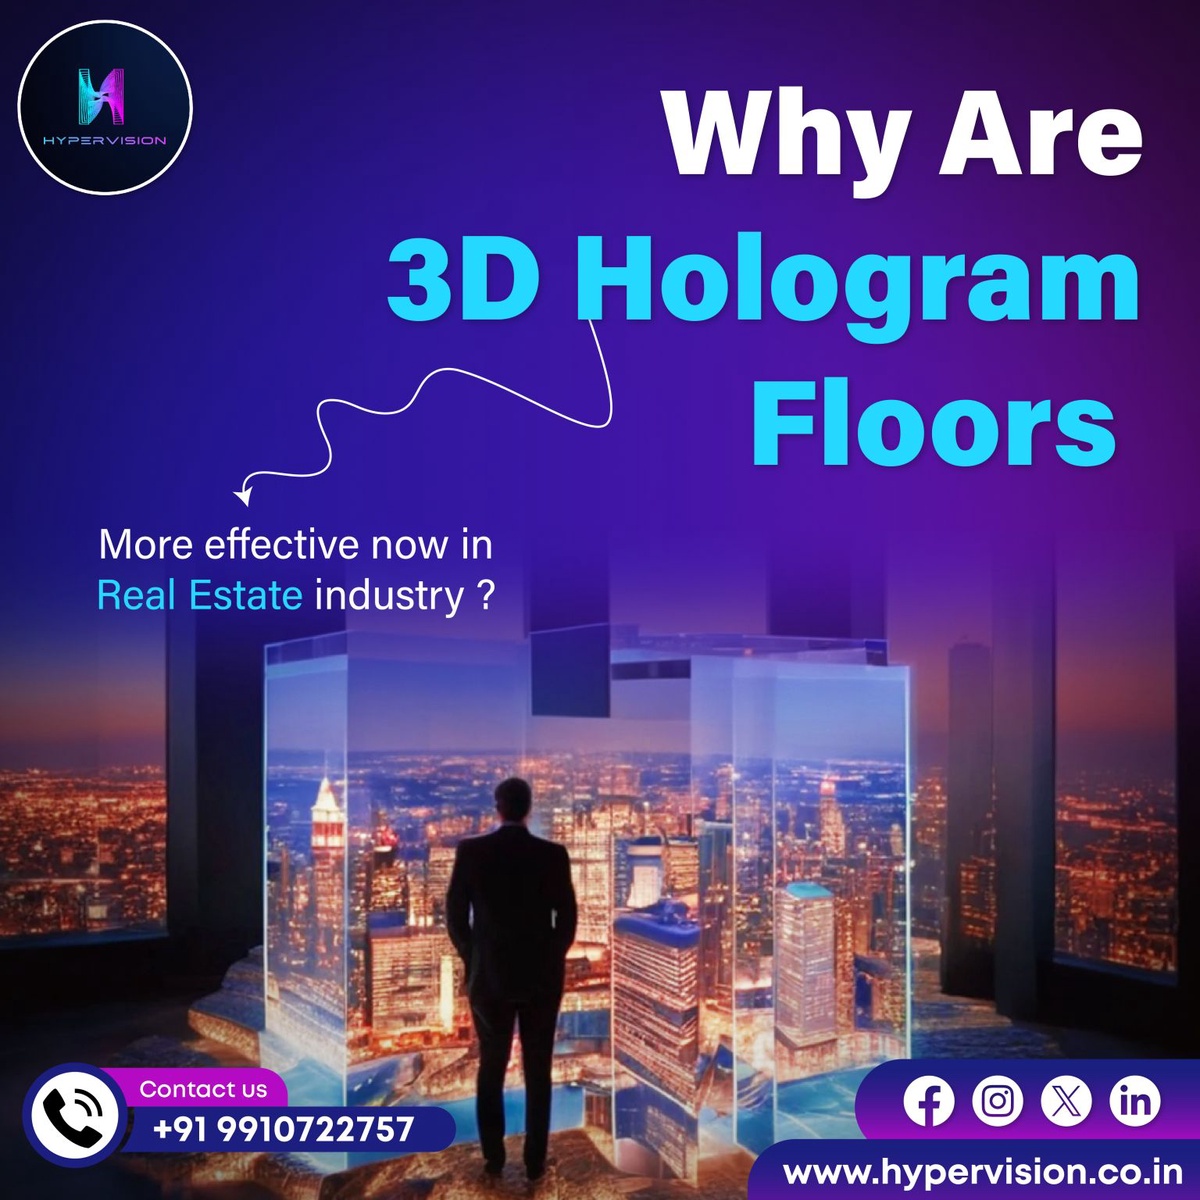 Why Are 3D Hologram Floors More effective now in the Real Estate industry ?